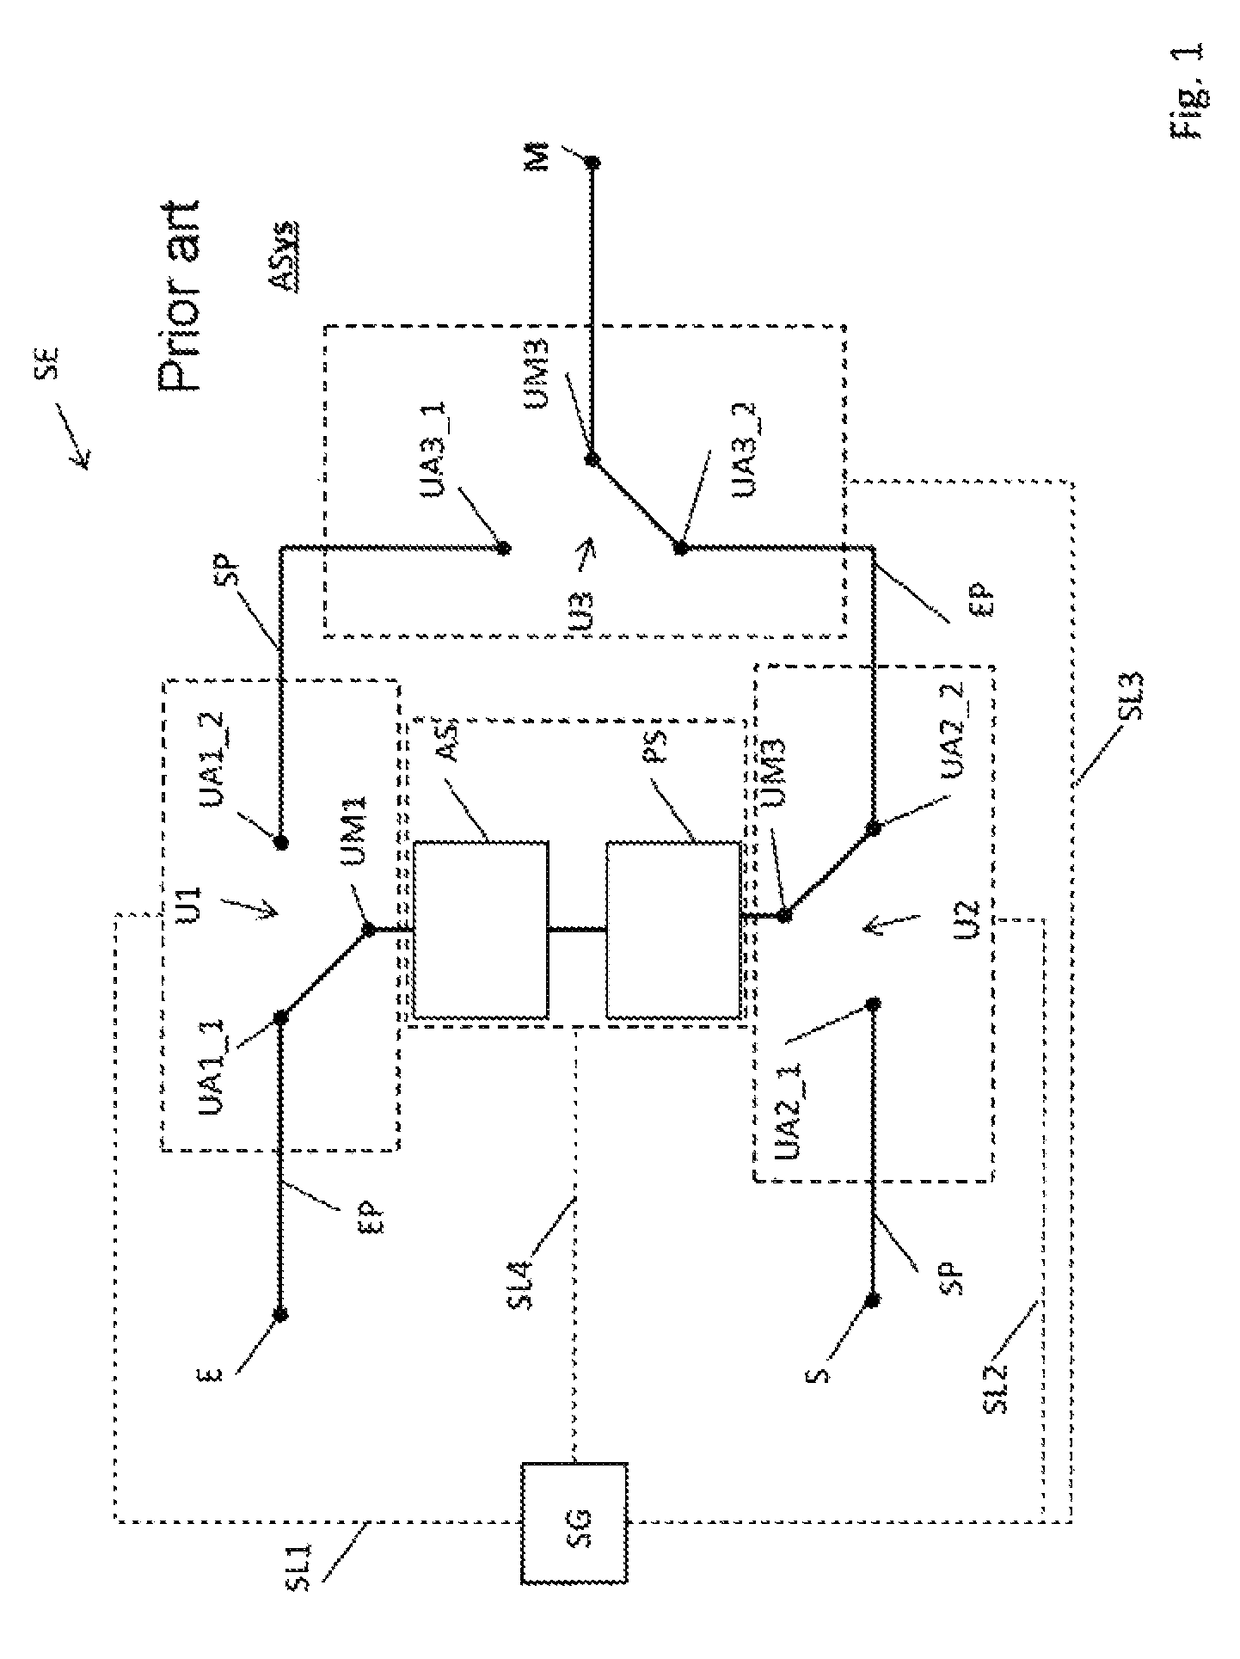 Transceiver element for an active, electronically controlled antenna system